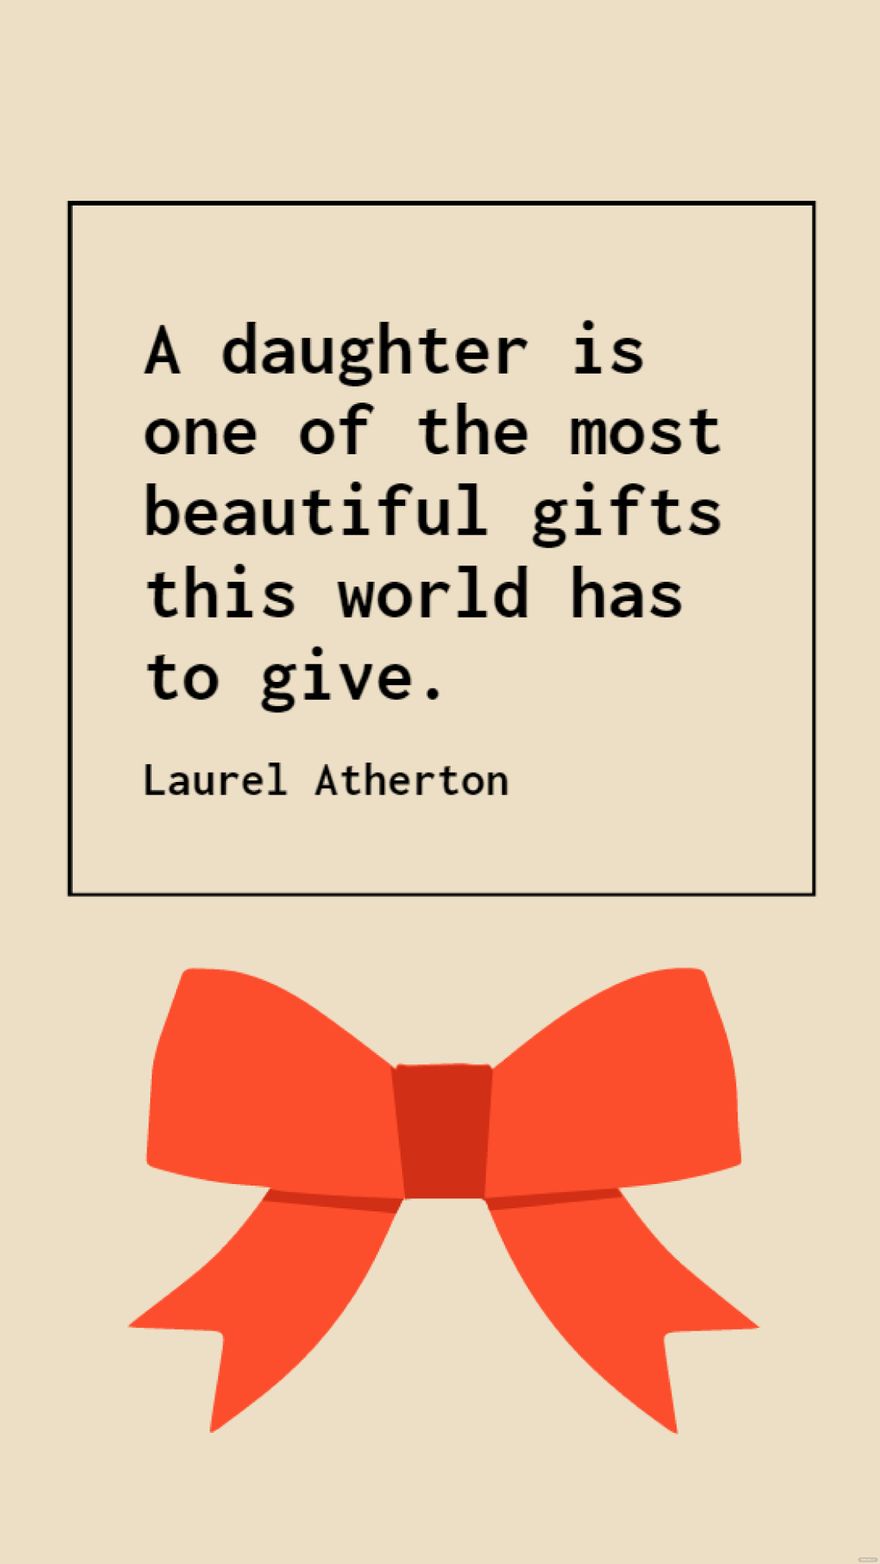 Free Laurel Atherton - A daughter is one of the most beautiful gifts this world has to give. in JPG